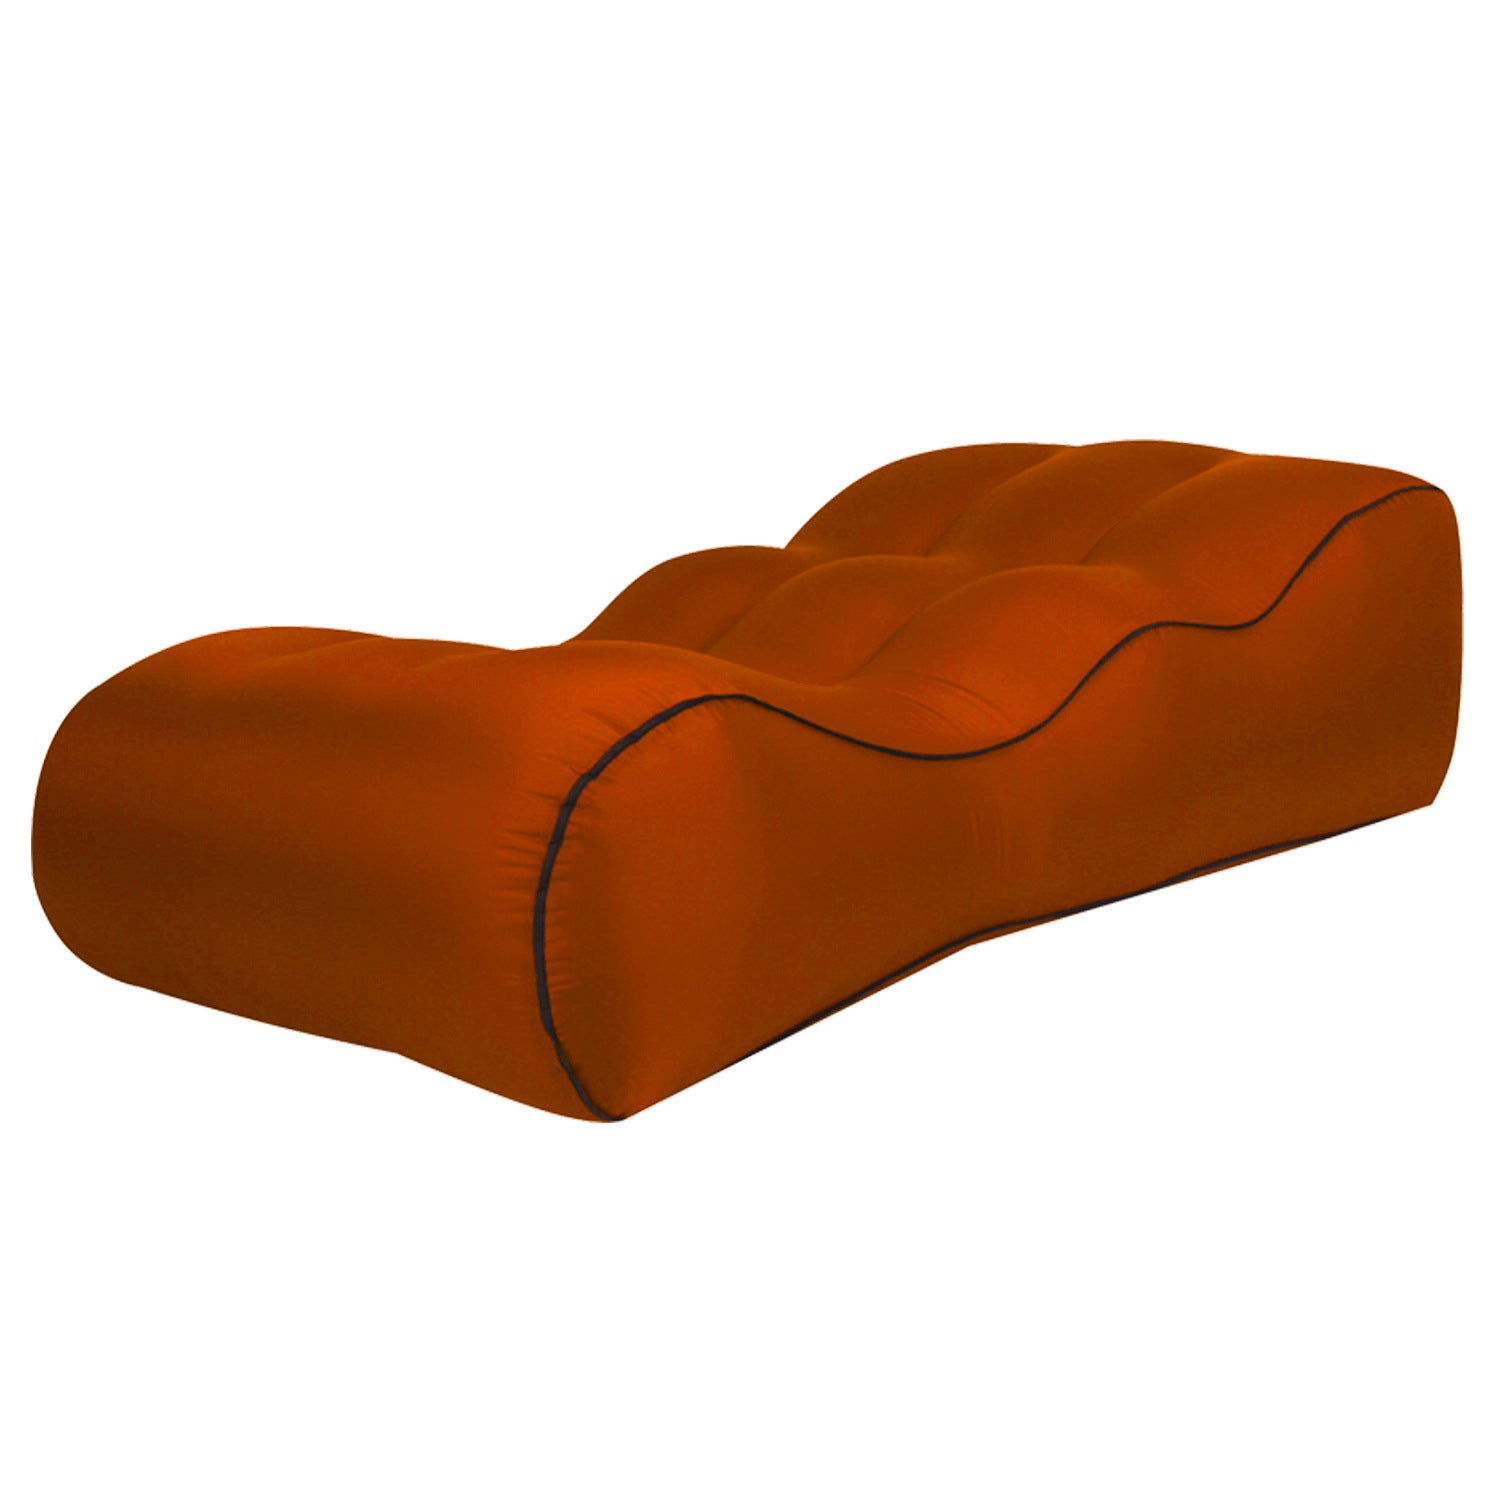 Orange Large Inflatable Sofa Outdoor Lounge For 1 Person